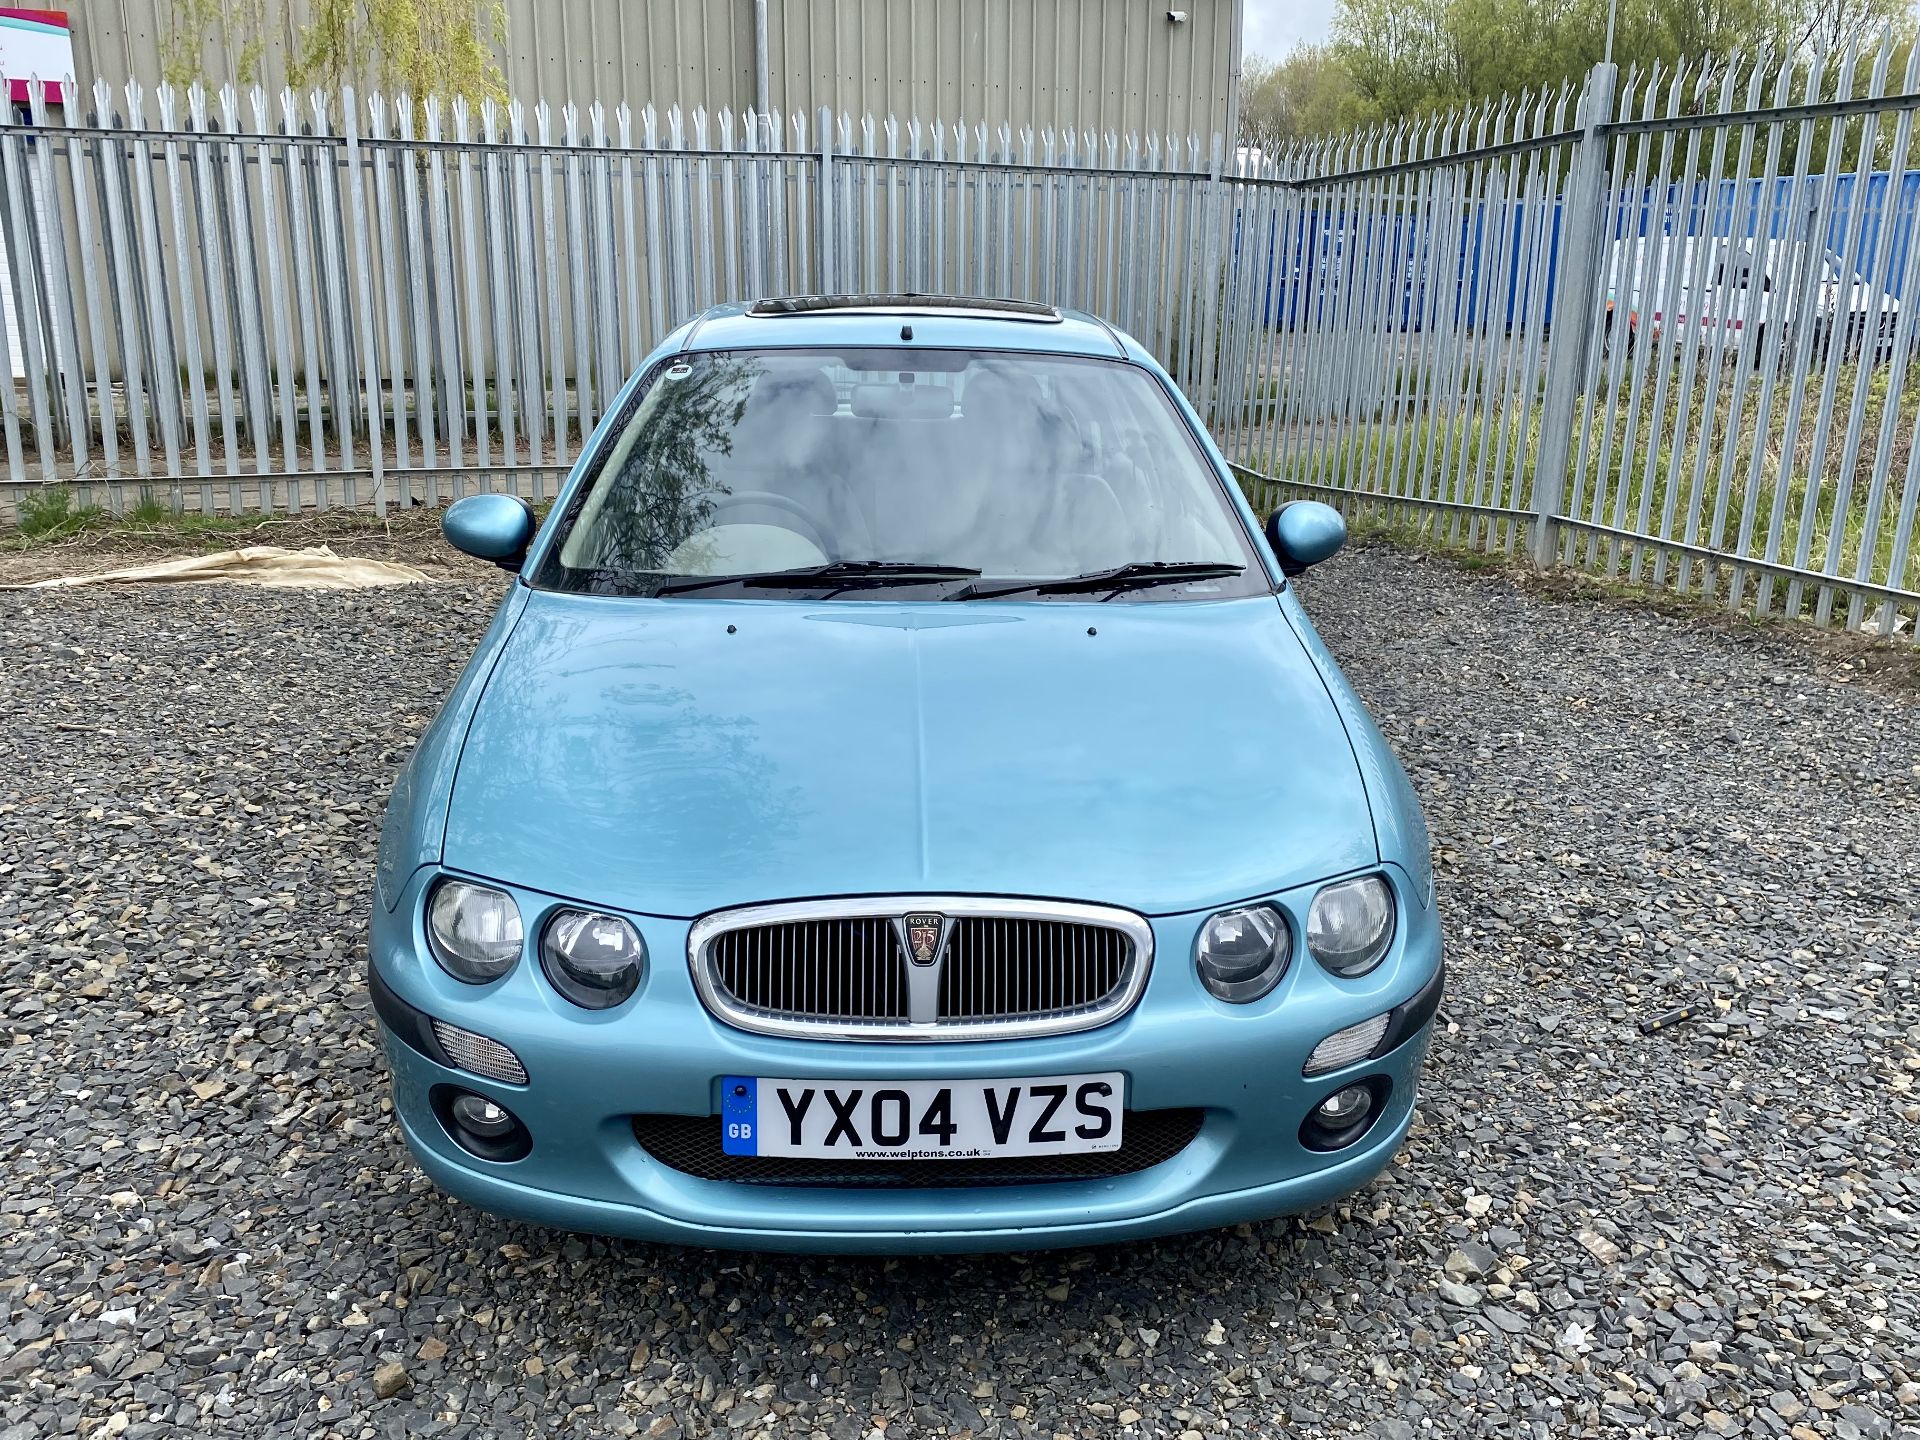 Rover 25 - Image 12 of 36